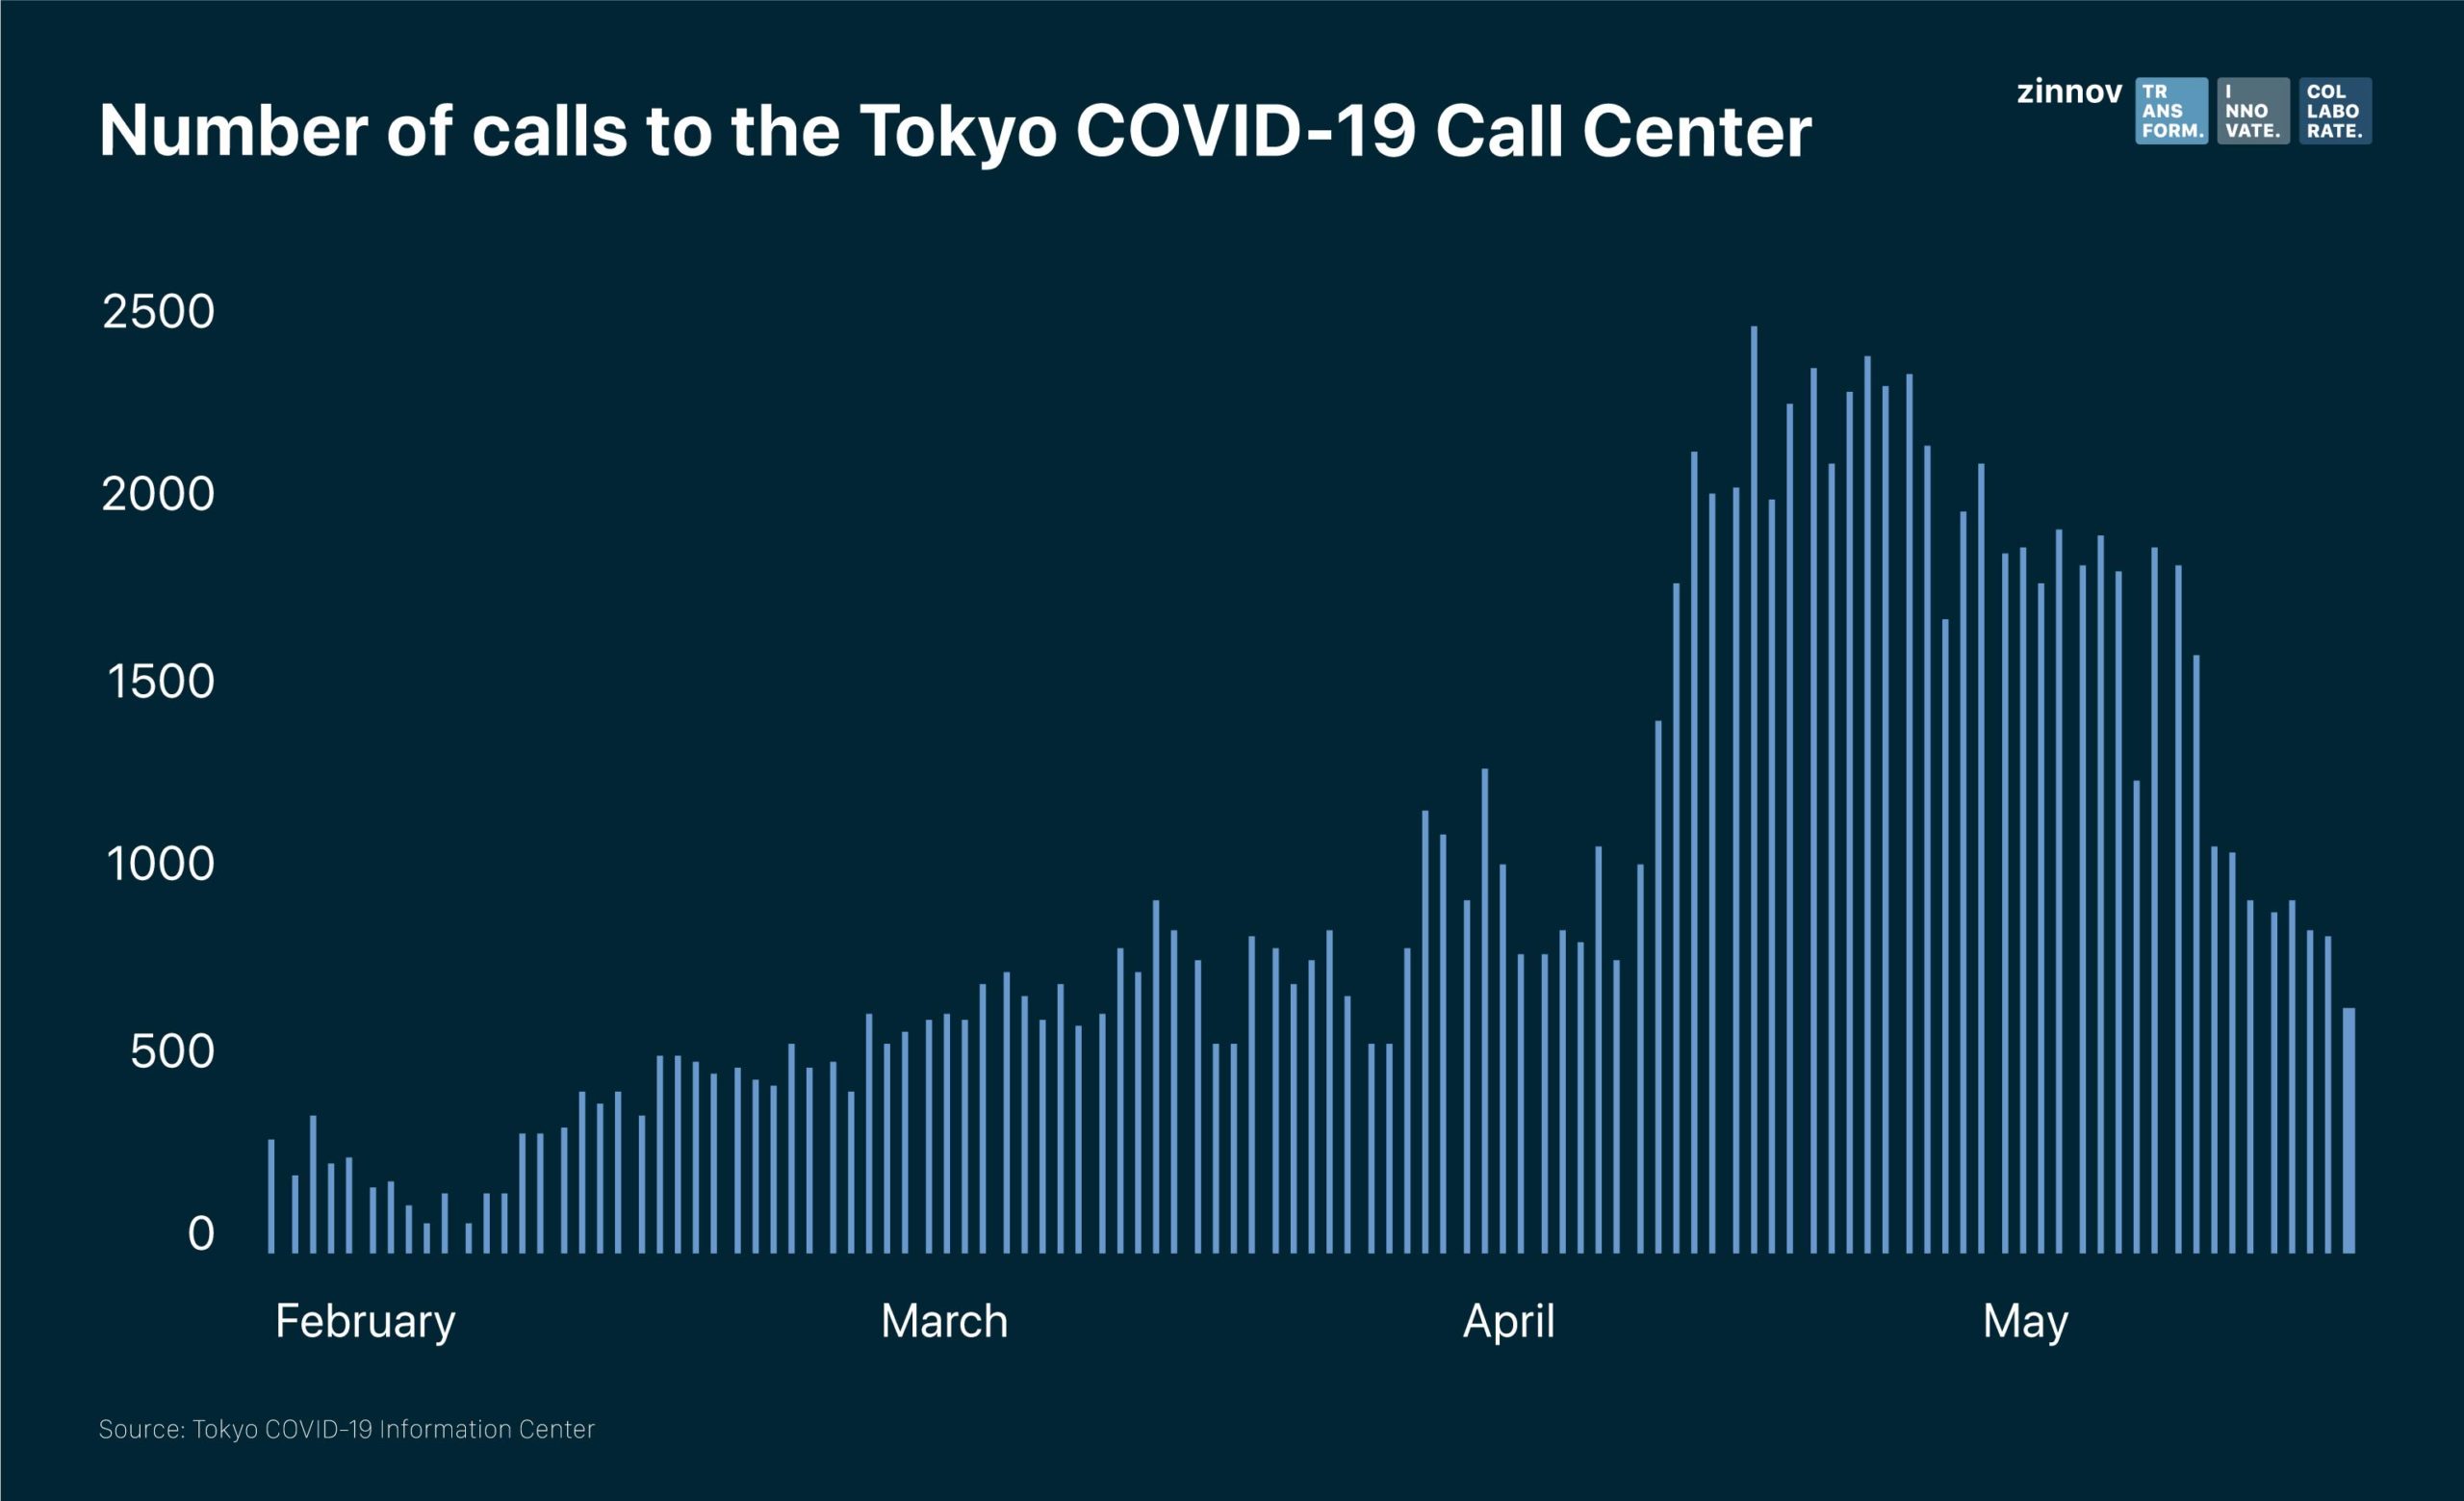 Number of calls to Tokyo COVID-19 call center